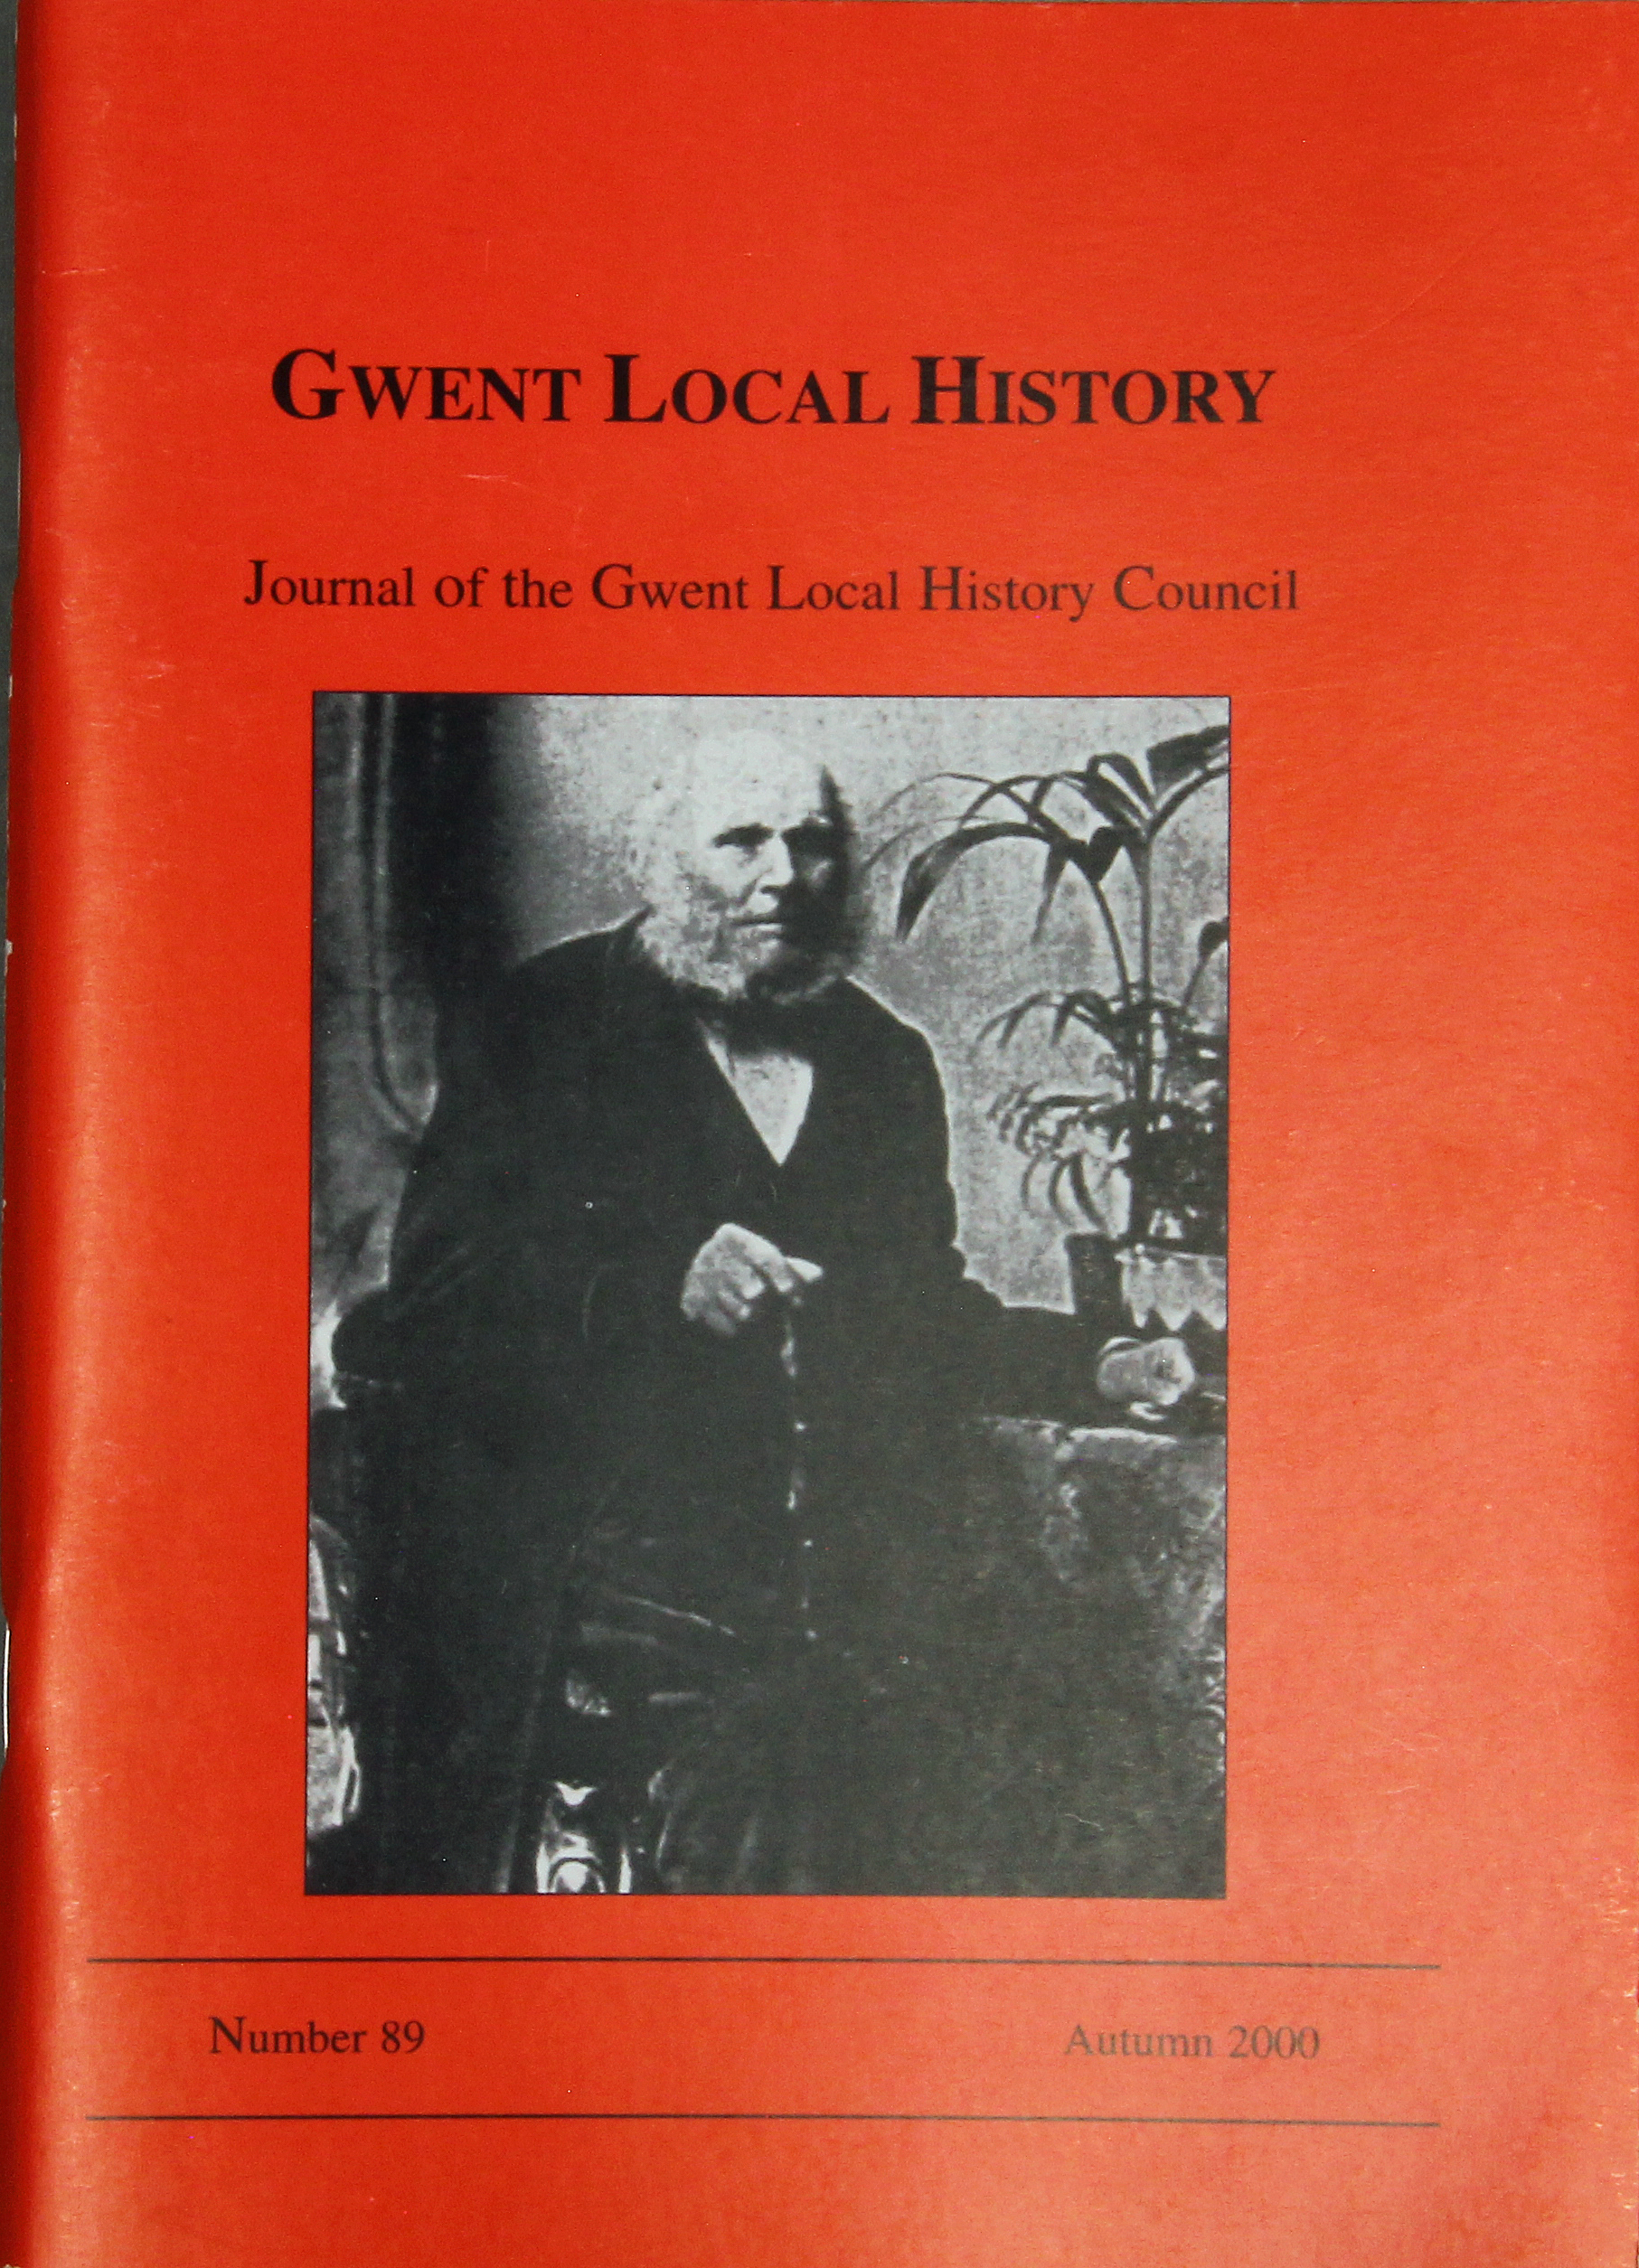 Gwent Local History: Journal of the Gwent Local History Council No.89, Autumn 2000, £2.00